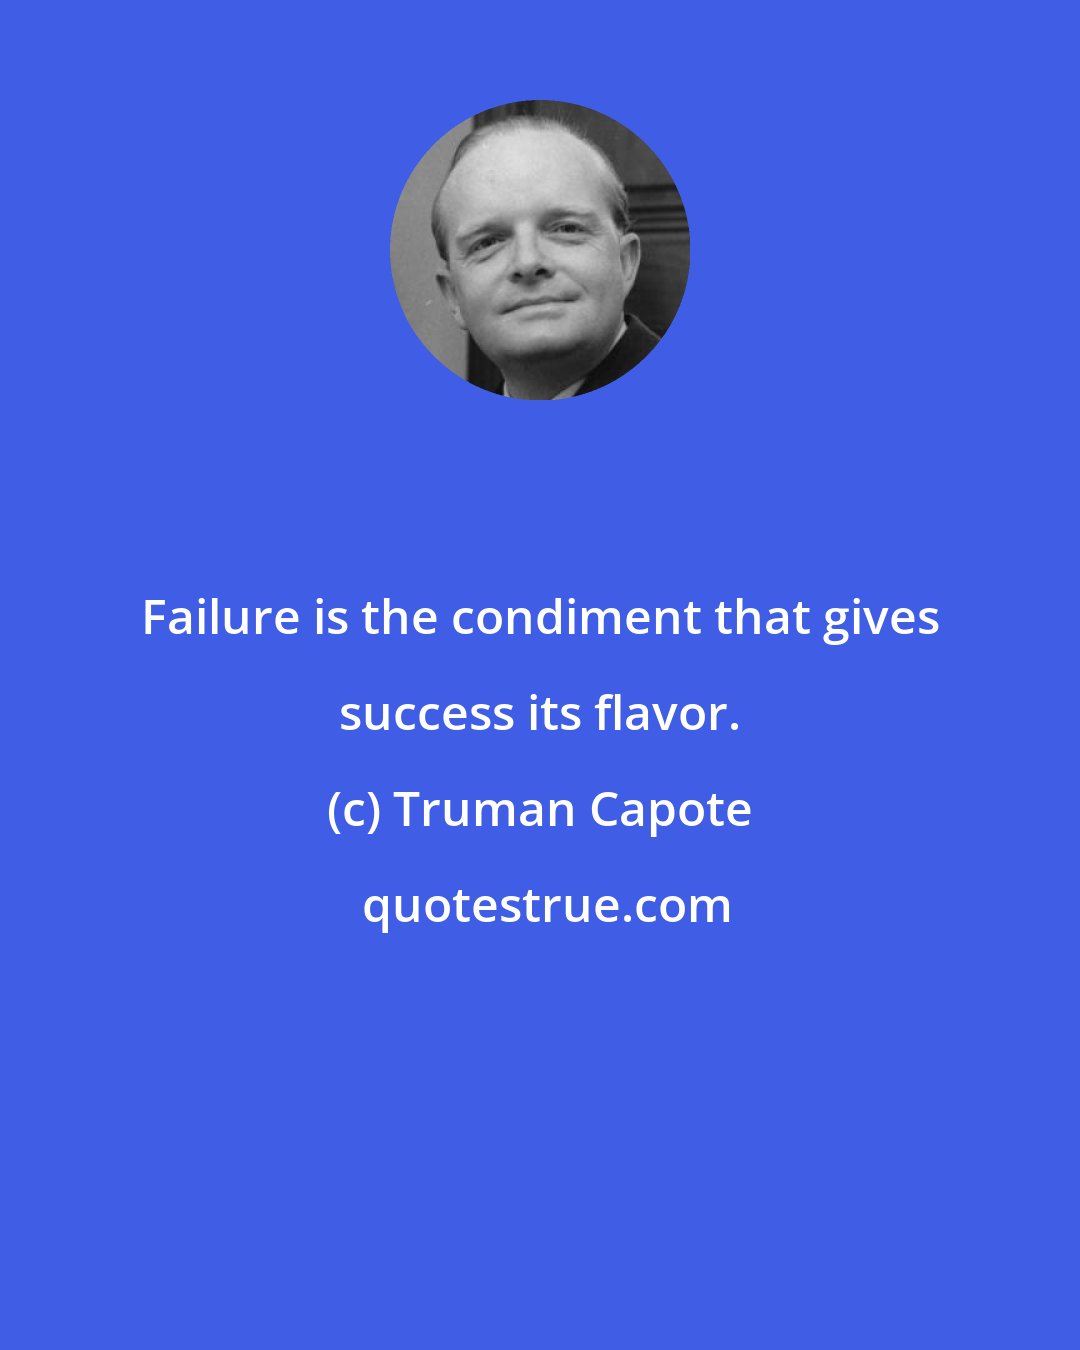 Truman Capote: Failure is the condiment that gives success its flavor.